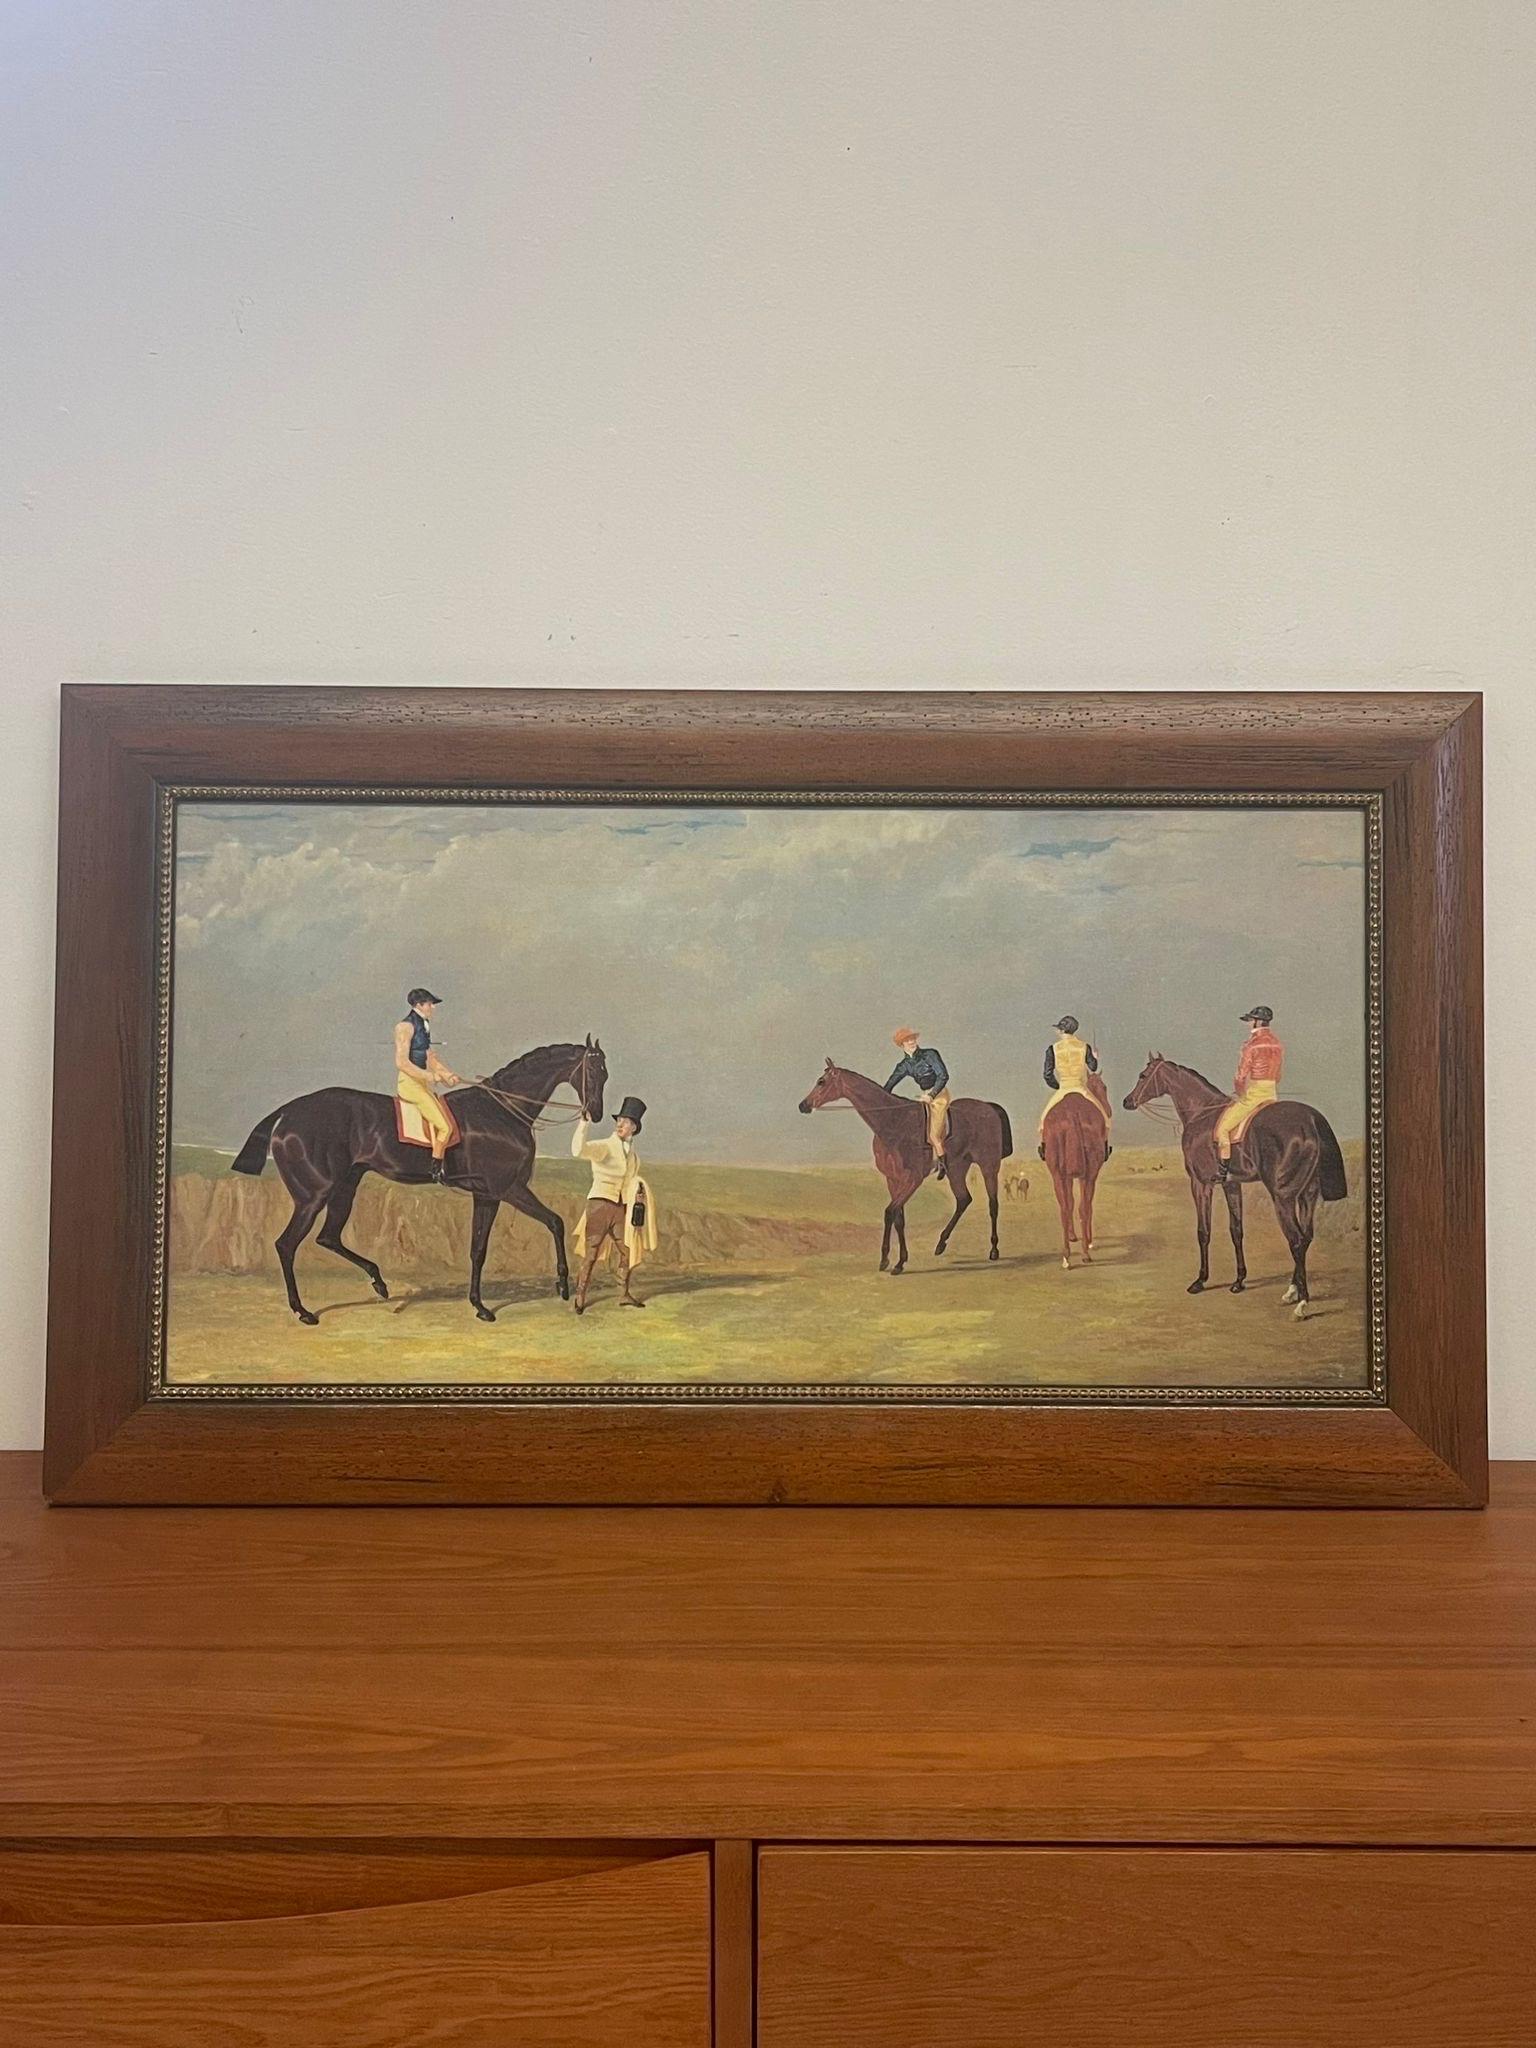 Vintage Print of Equestrian Riding through a Field on Canvas. Wooden Frame. Vintage Condition Consistent with Age as Pictured.

Dimensions. 38 W ; 3/4 D ; 21 1/2 H